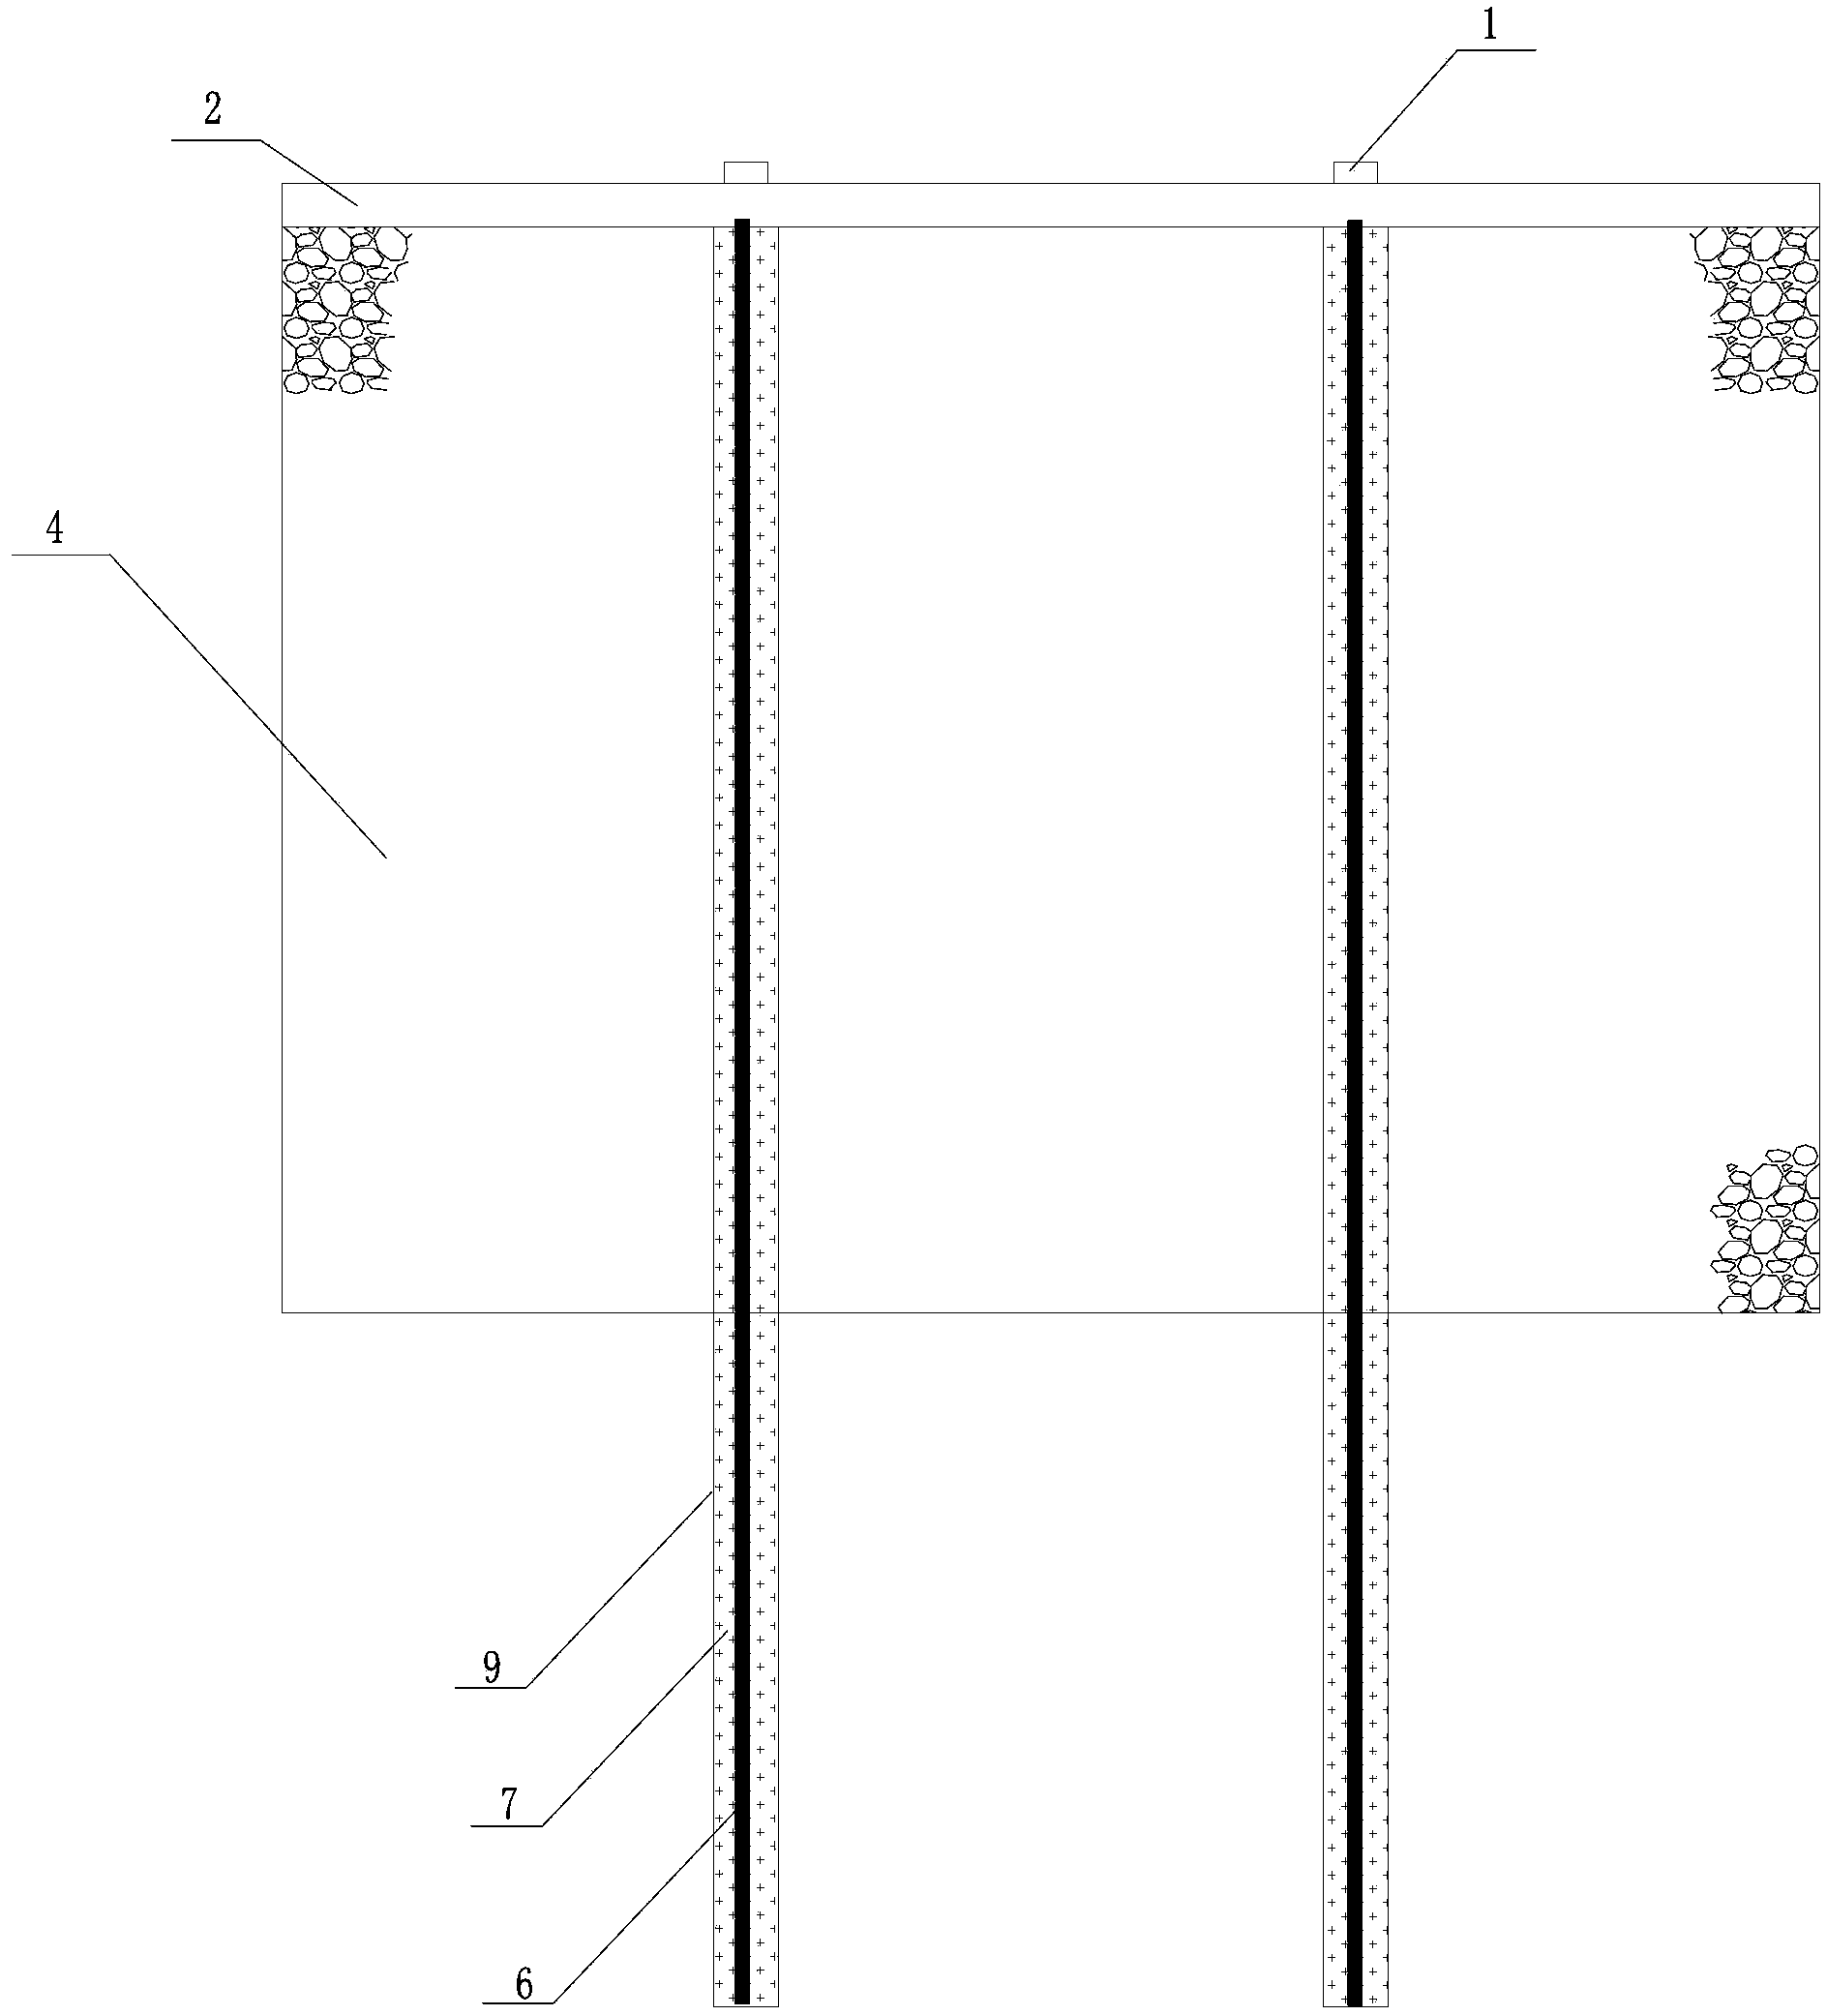 Vertical pres-stressed anchor rod gravity-type composite retaining wall and method for designing and constructing retaining wall